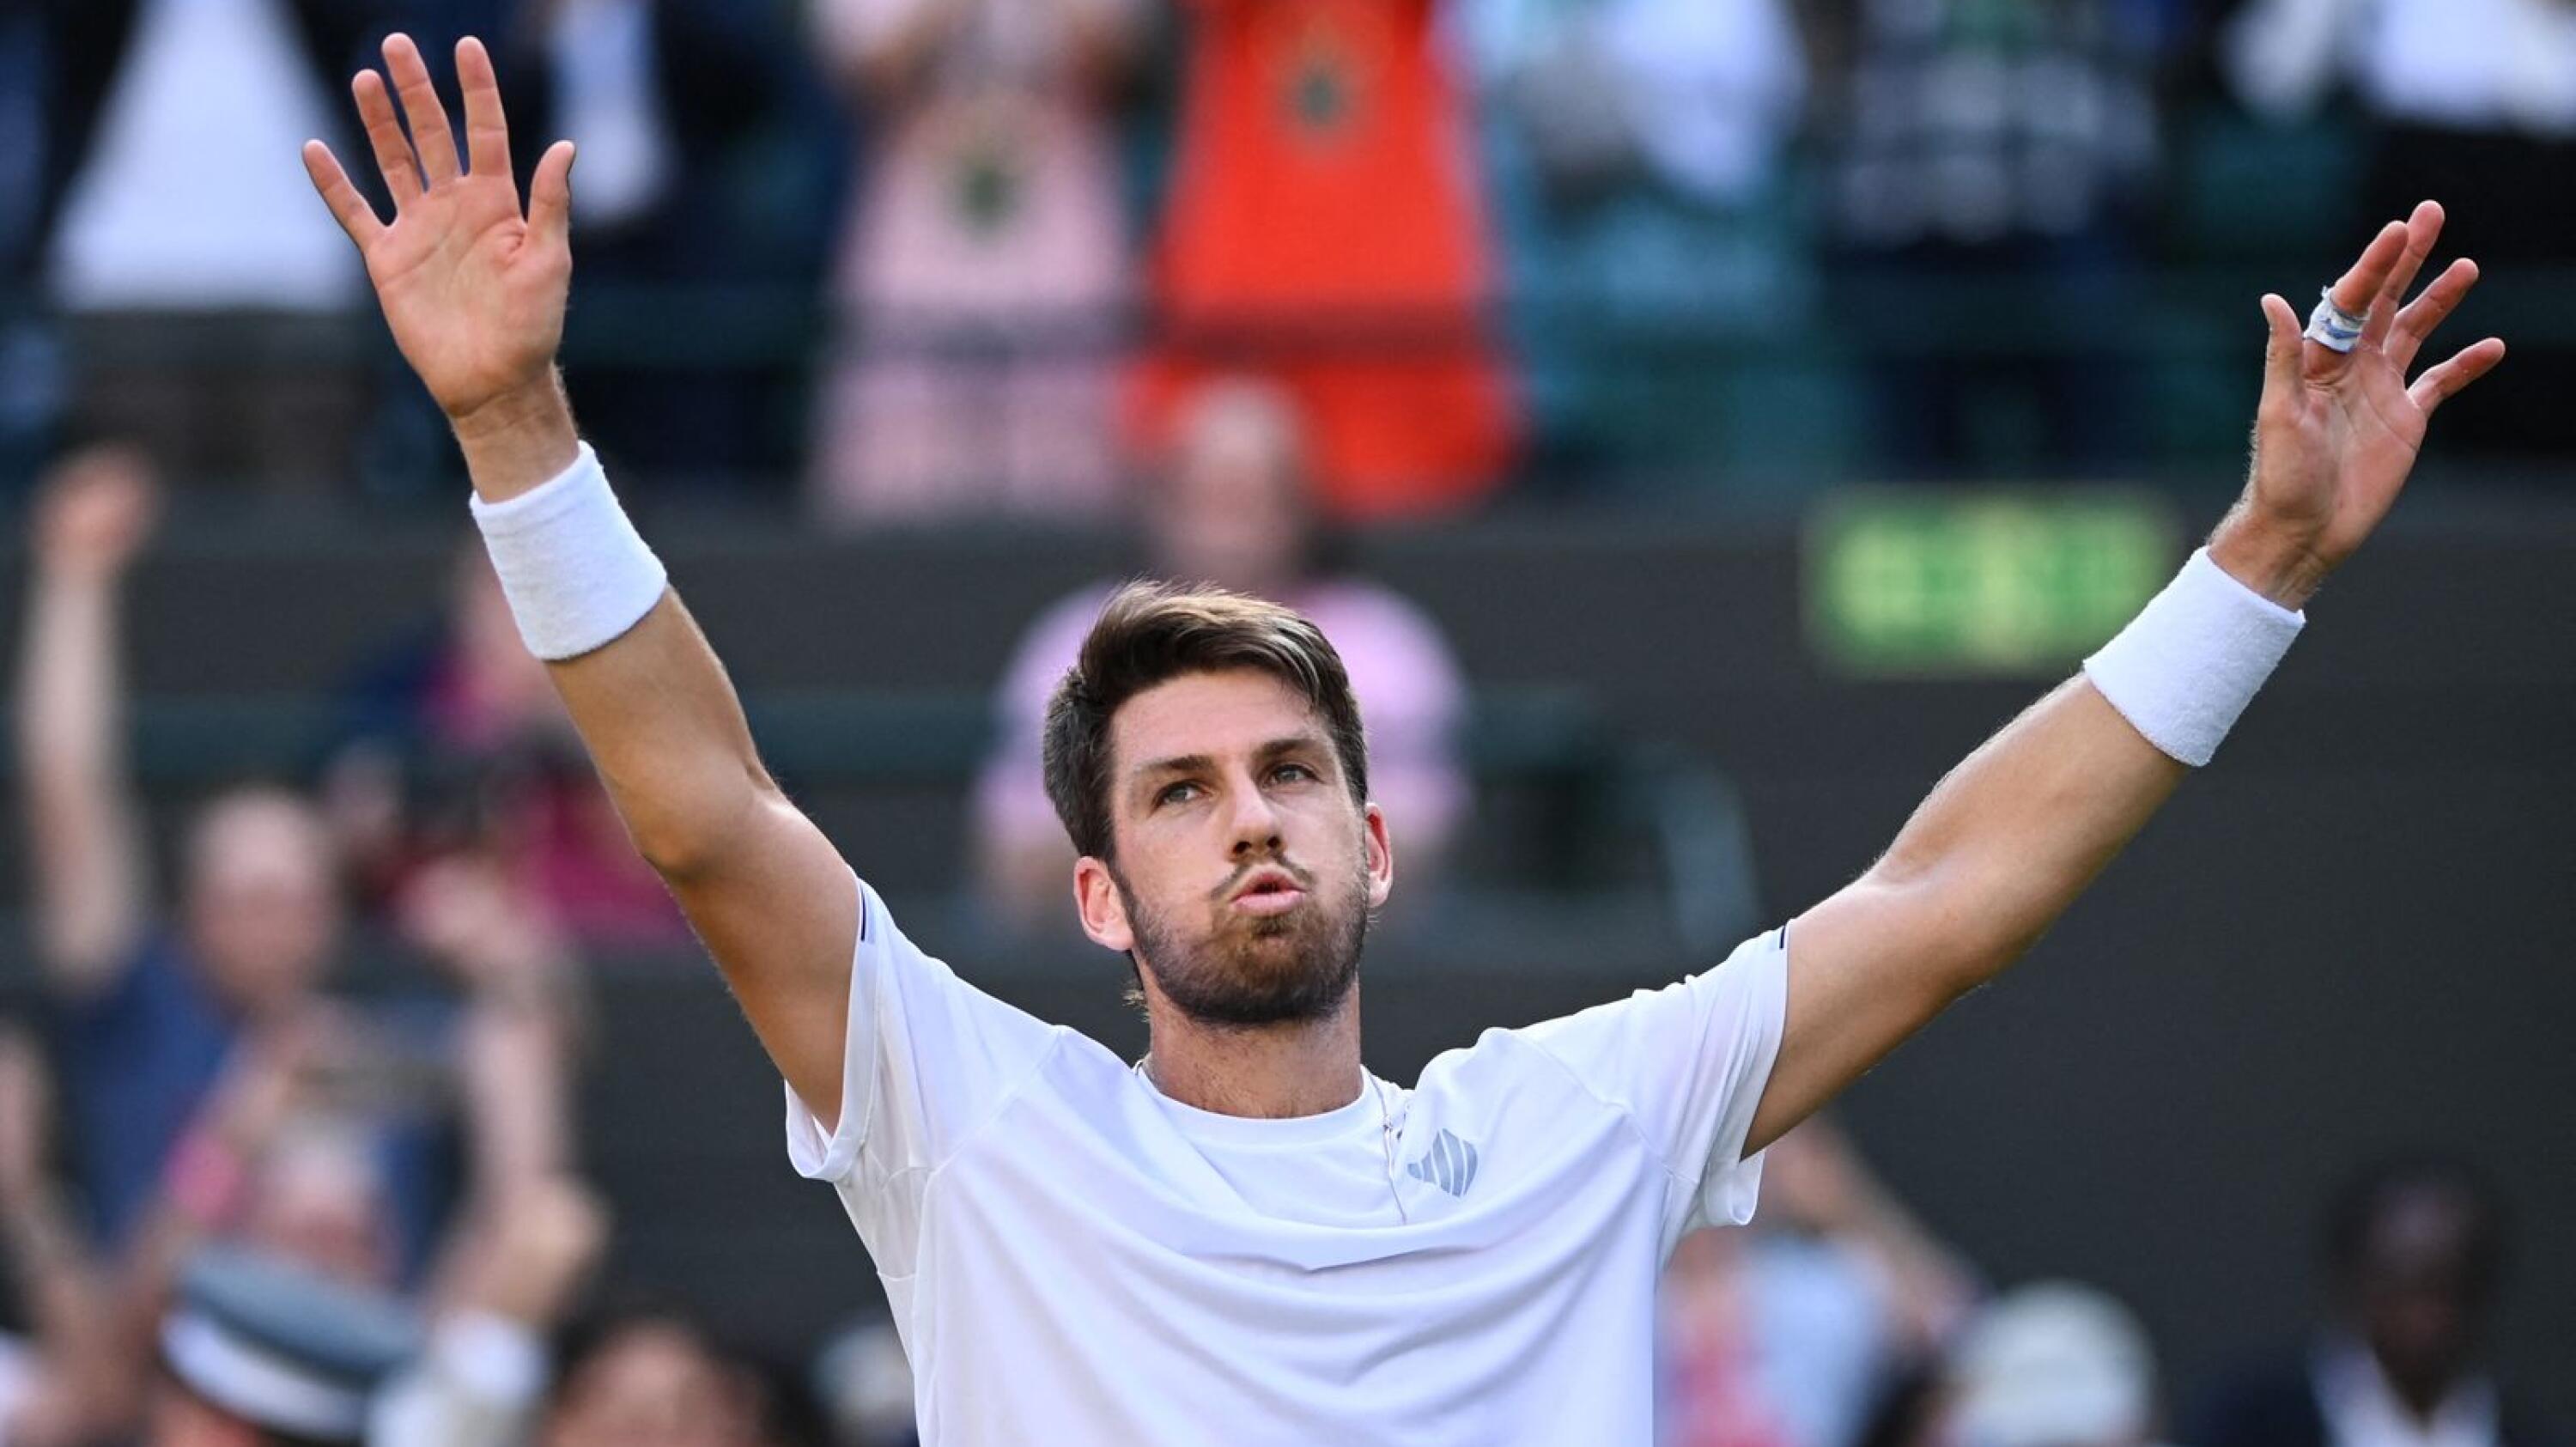 Britain's Cameron Norrie celebrates winning against Belgium's David Goffin at the end of their men's singles quarter final tennis match on the ninth day of the 2022 Wimbledon Championships at The All England Tennis Club in Wimbledon, southwest London, on Tuesday